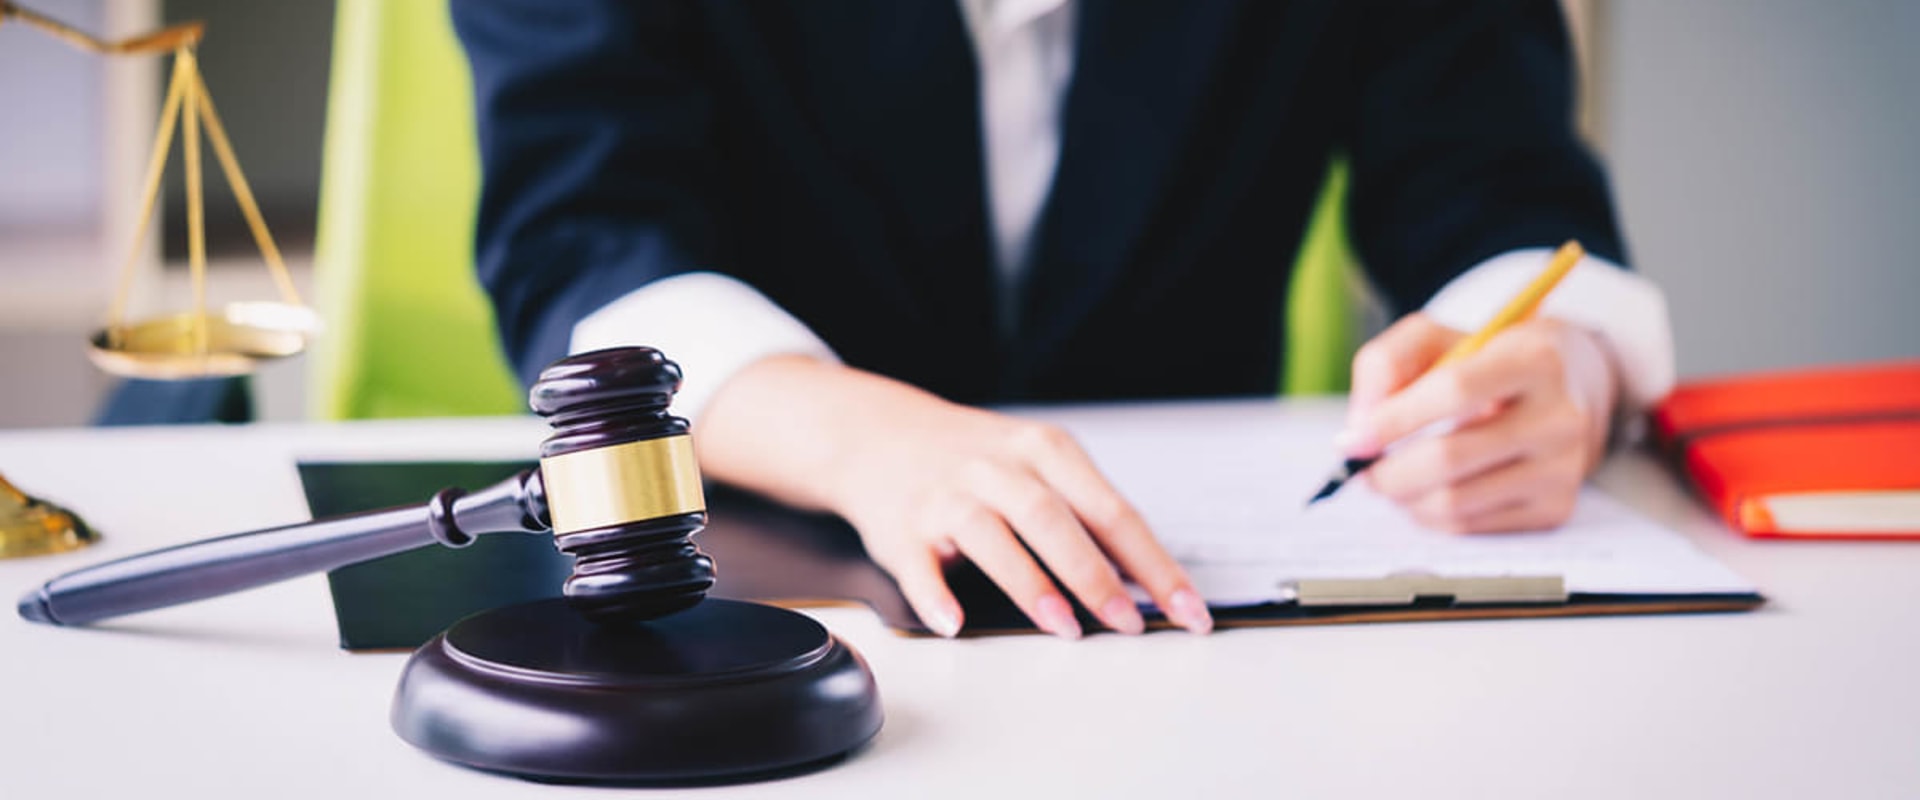 Why is criminal procedure important?